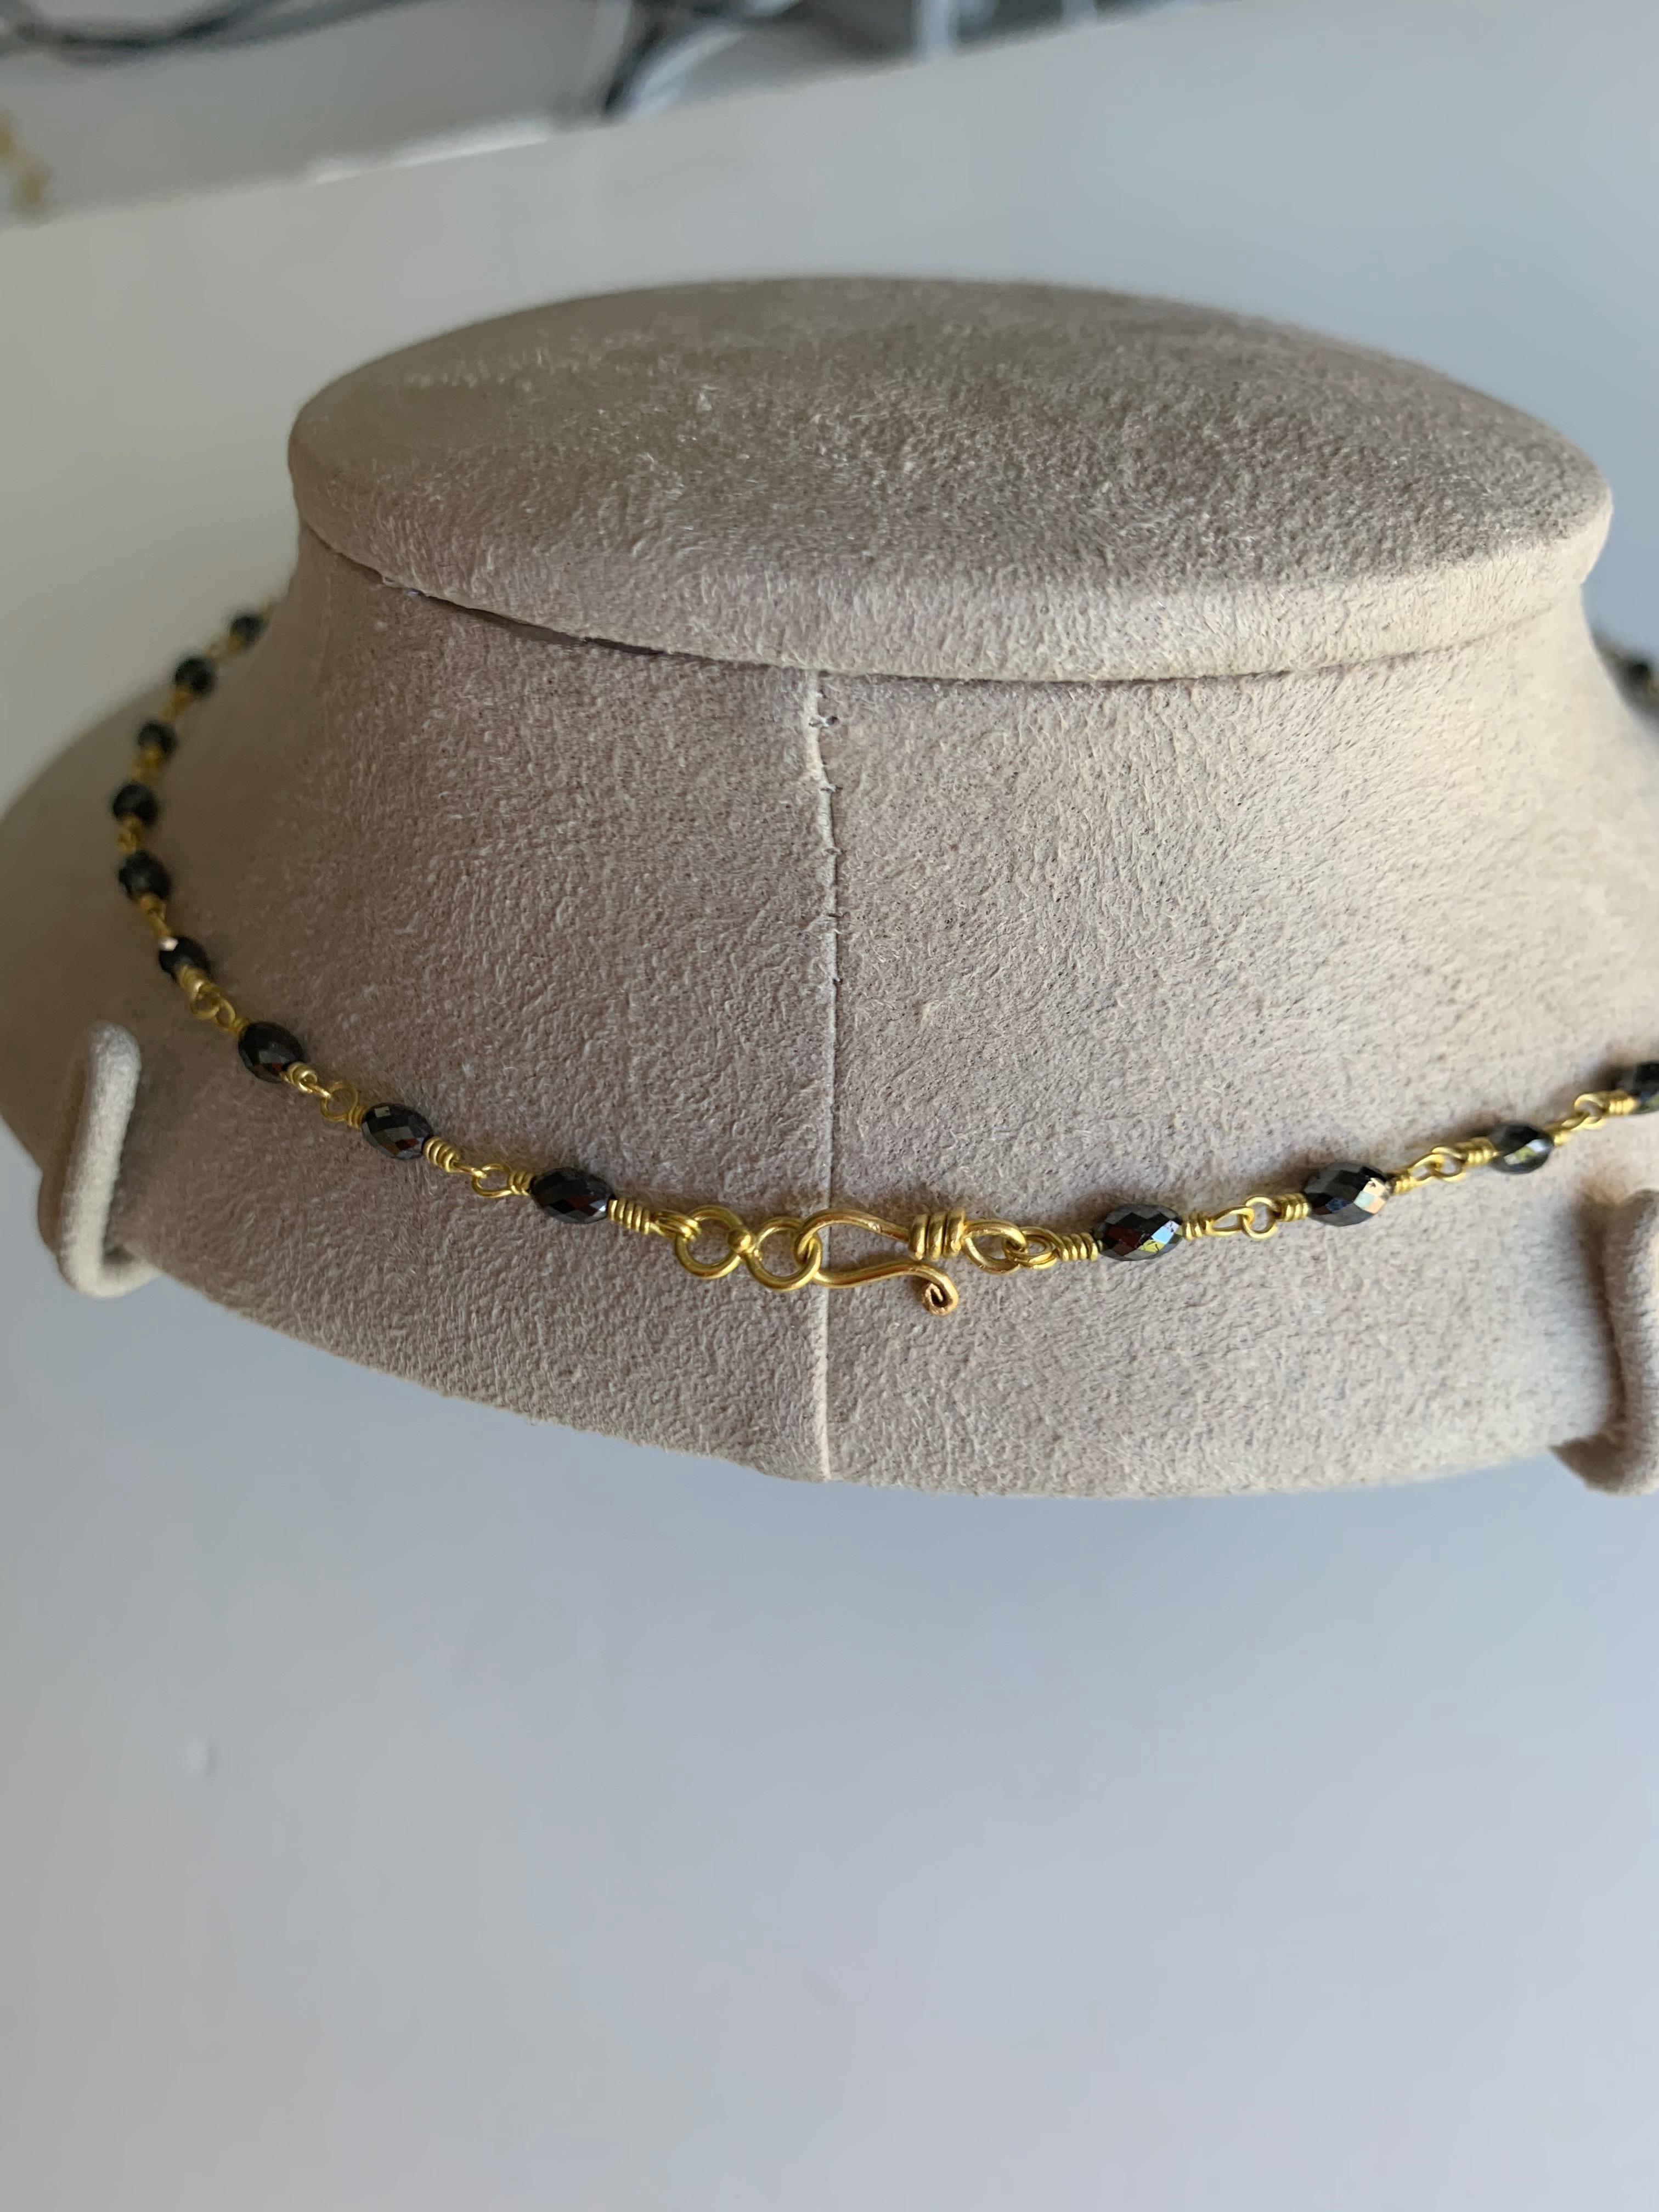 Very bright oval black Diamond bead necklace 18 inches long,  In 20 karat gold. This necklace is both delicate and bold.
Diamonds weigh 16 carats.
Hand crafted by the artist in her New York studio
